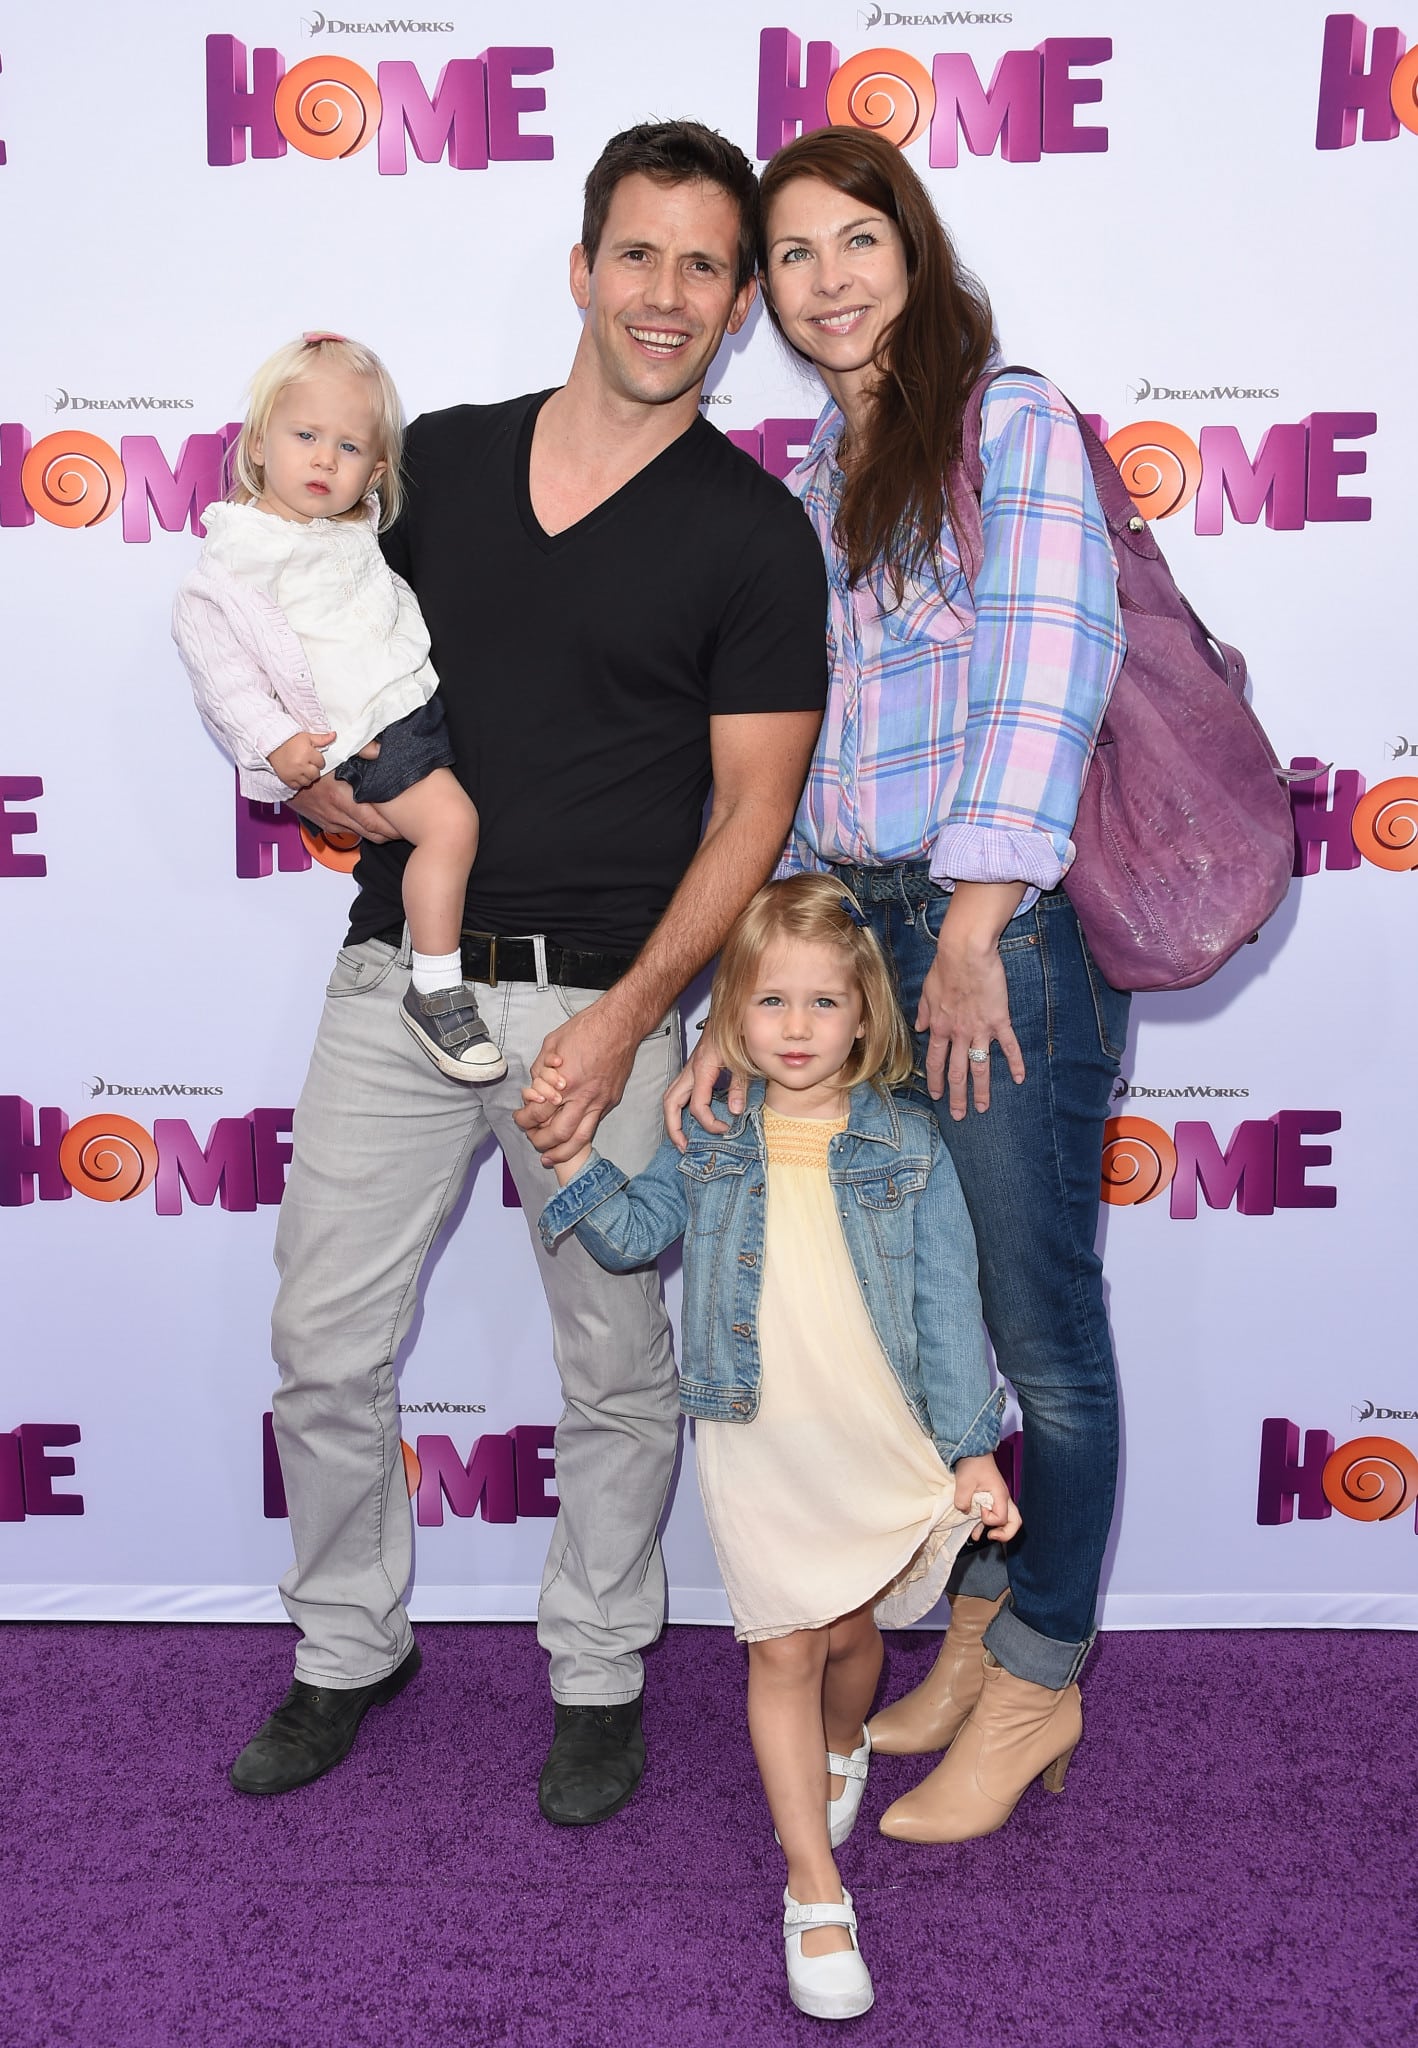 WESTWOOD, CA - MARCH 22: Actor Christian Oliver, wife Jessica Mazur and their children arrive at the Los Angeles premiere of 'HOME' at Regency Village Theatre on March 22, 2015 in Westwood, California. (Photo by Axelle/Bauer-Griffin/FilmMagic)